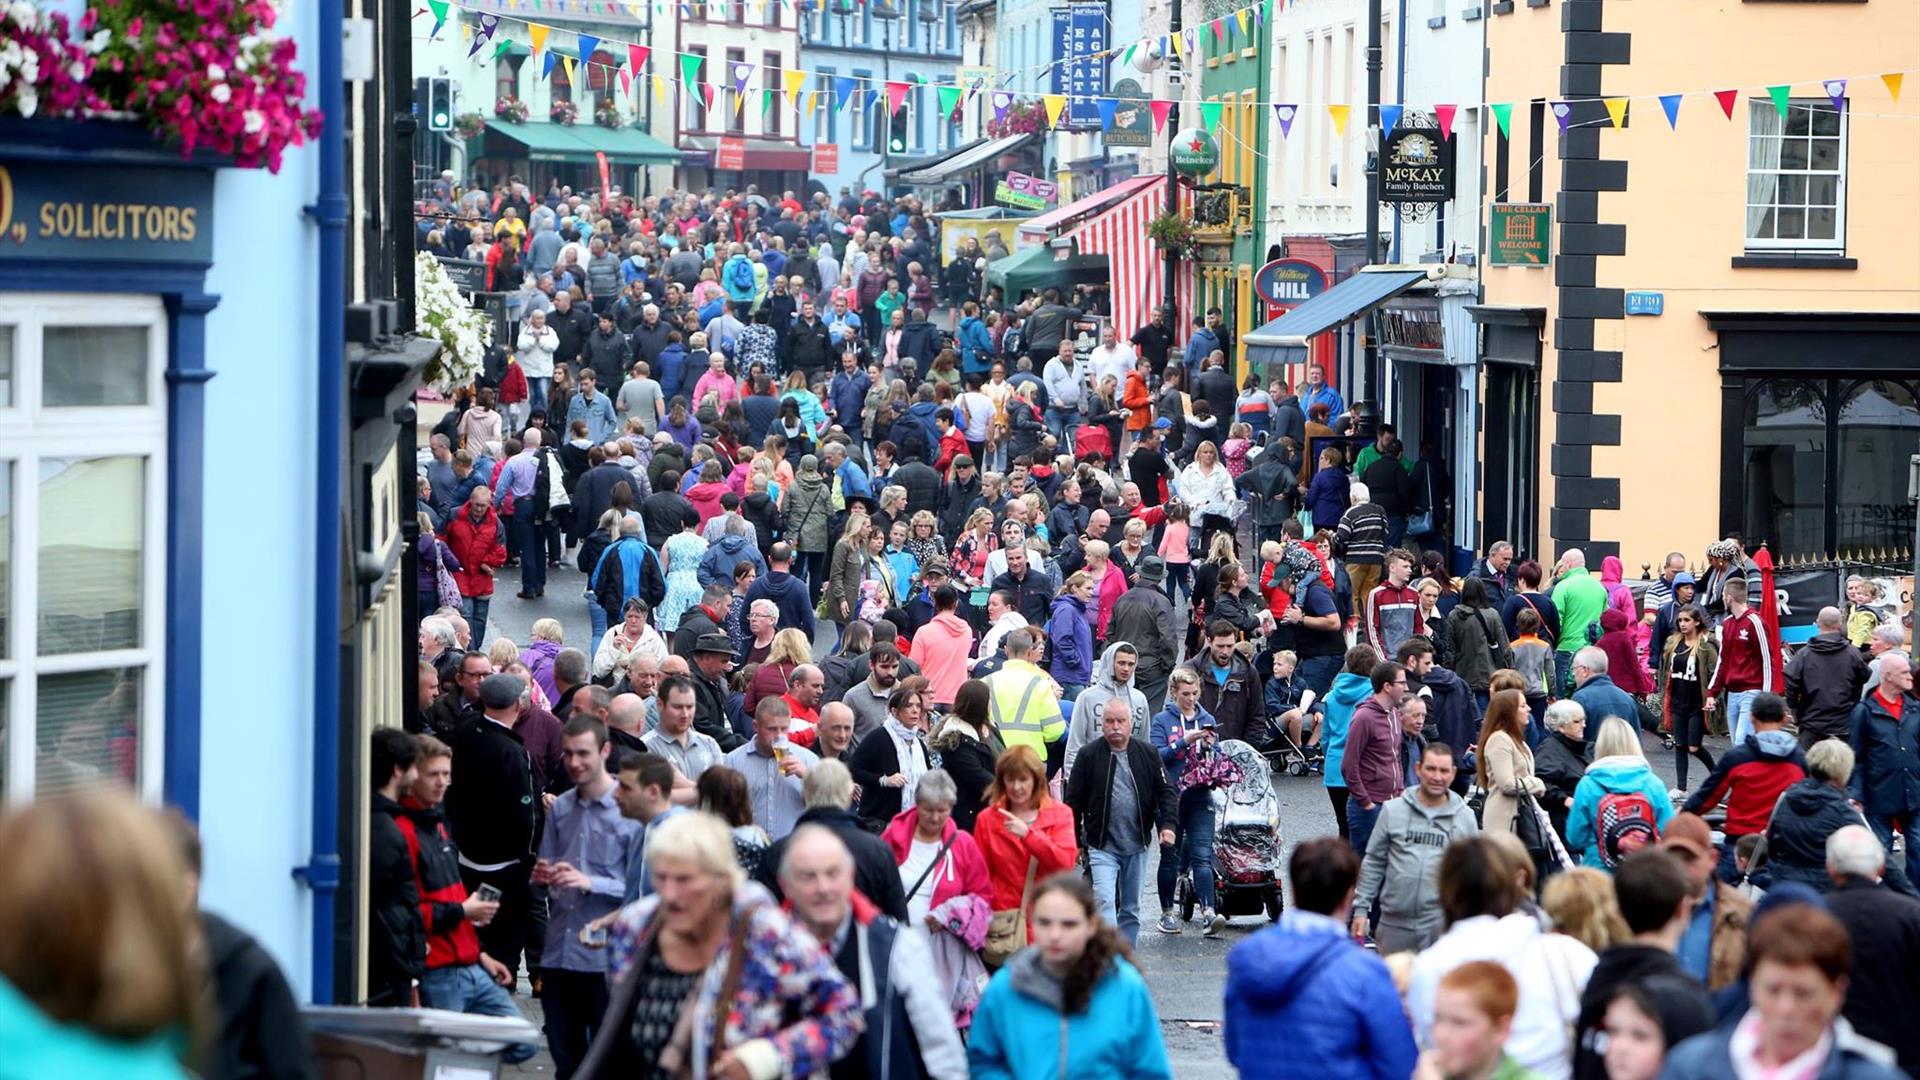 Crowds of people on a busy street in Ballycastle